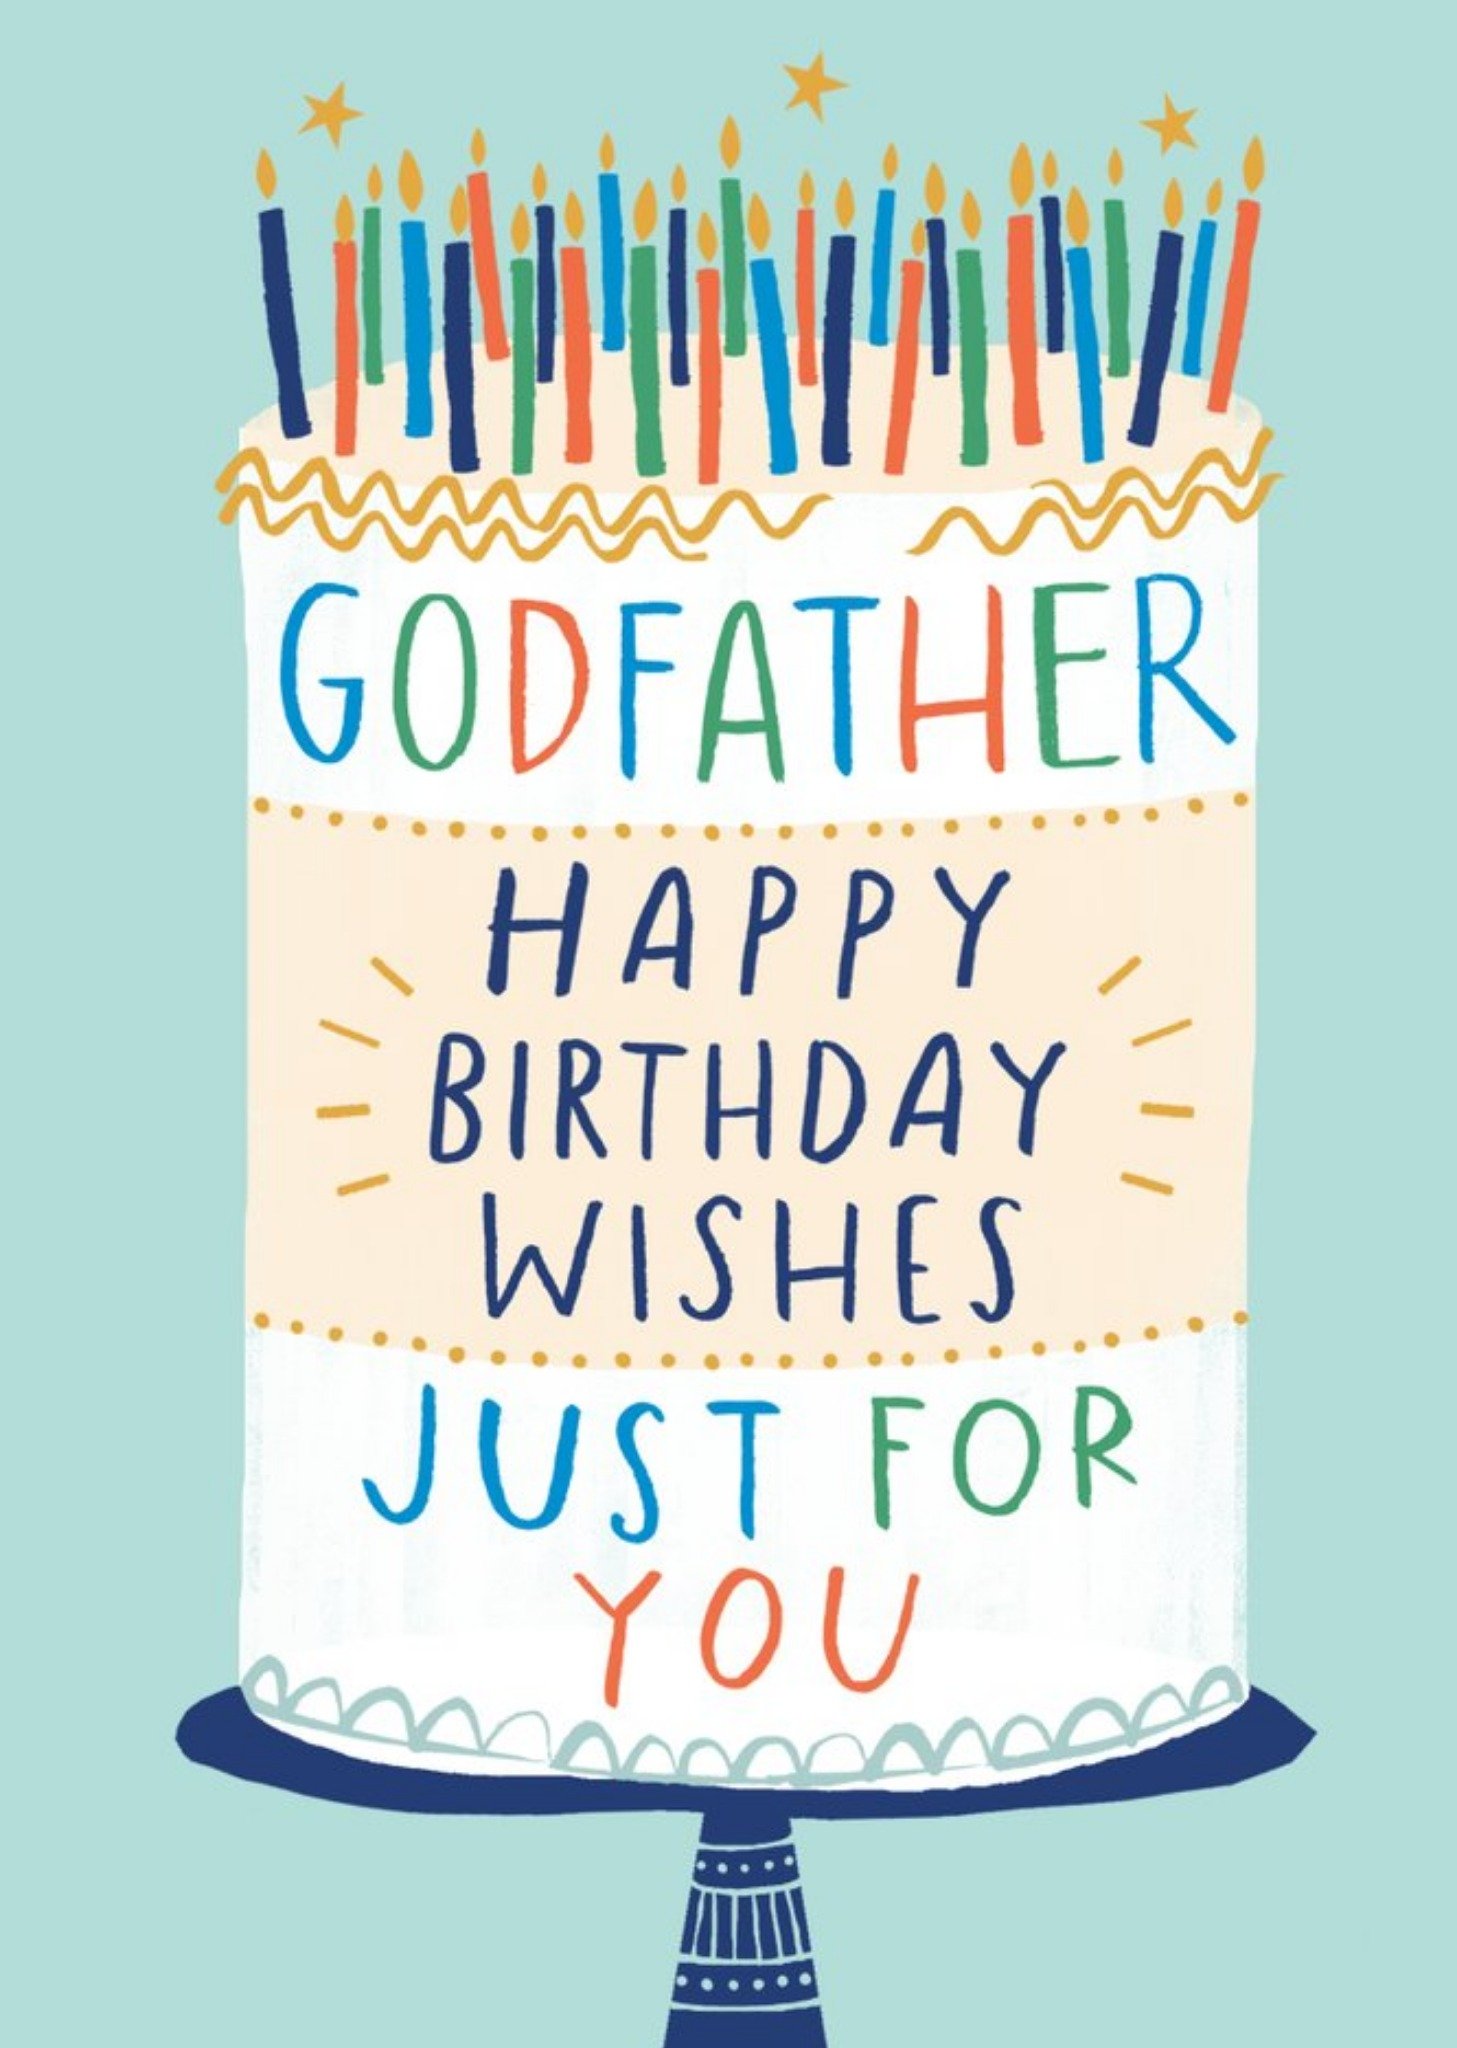 Moonpig Illustration Of A Birthday Cake On A Teal Background Godfather's Birthday Card Ecard